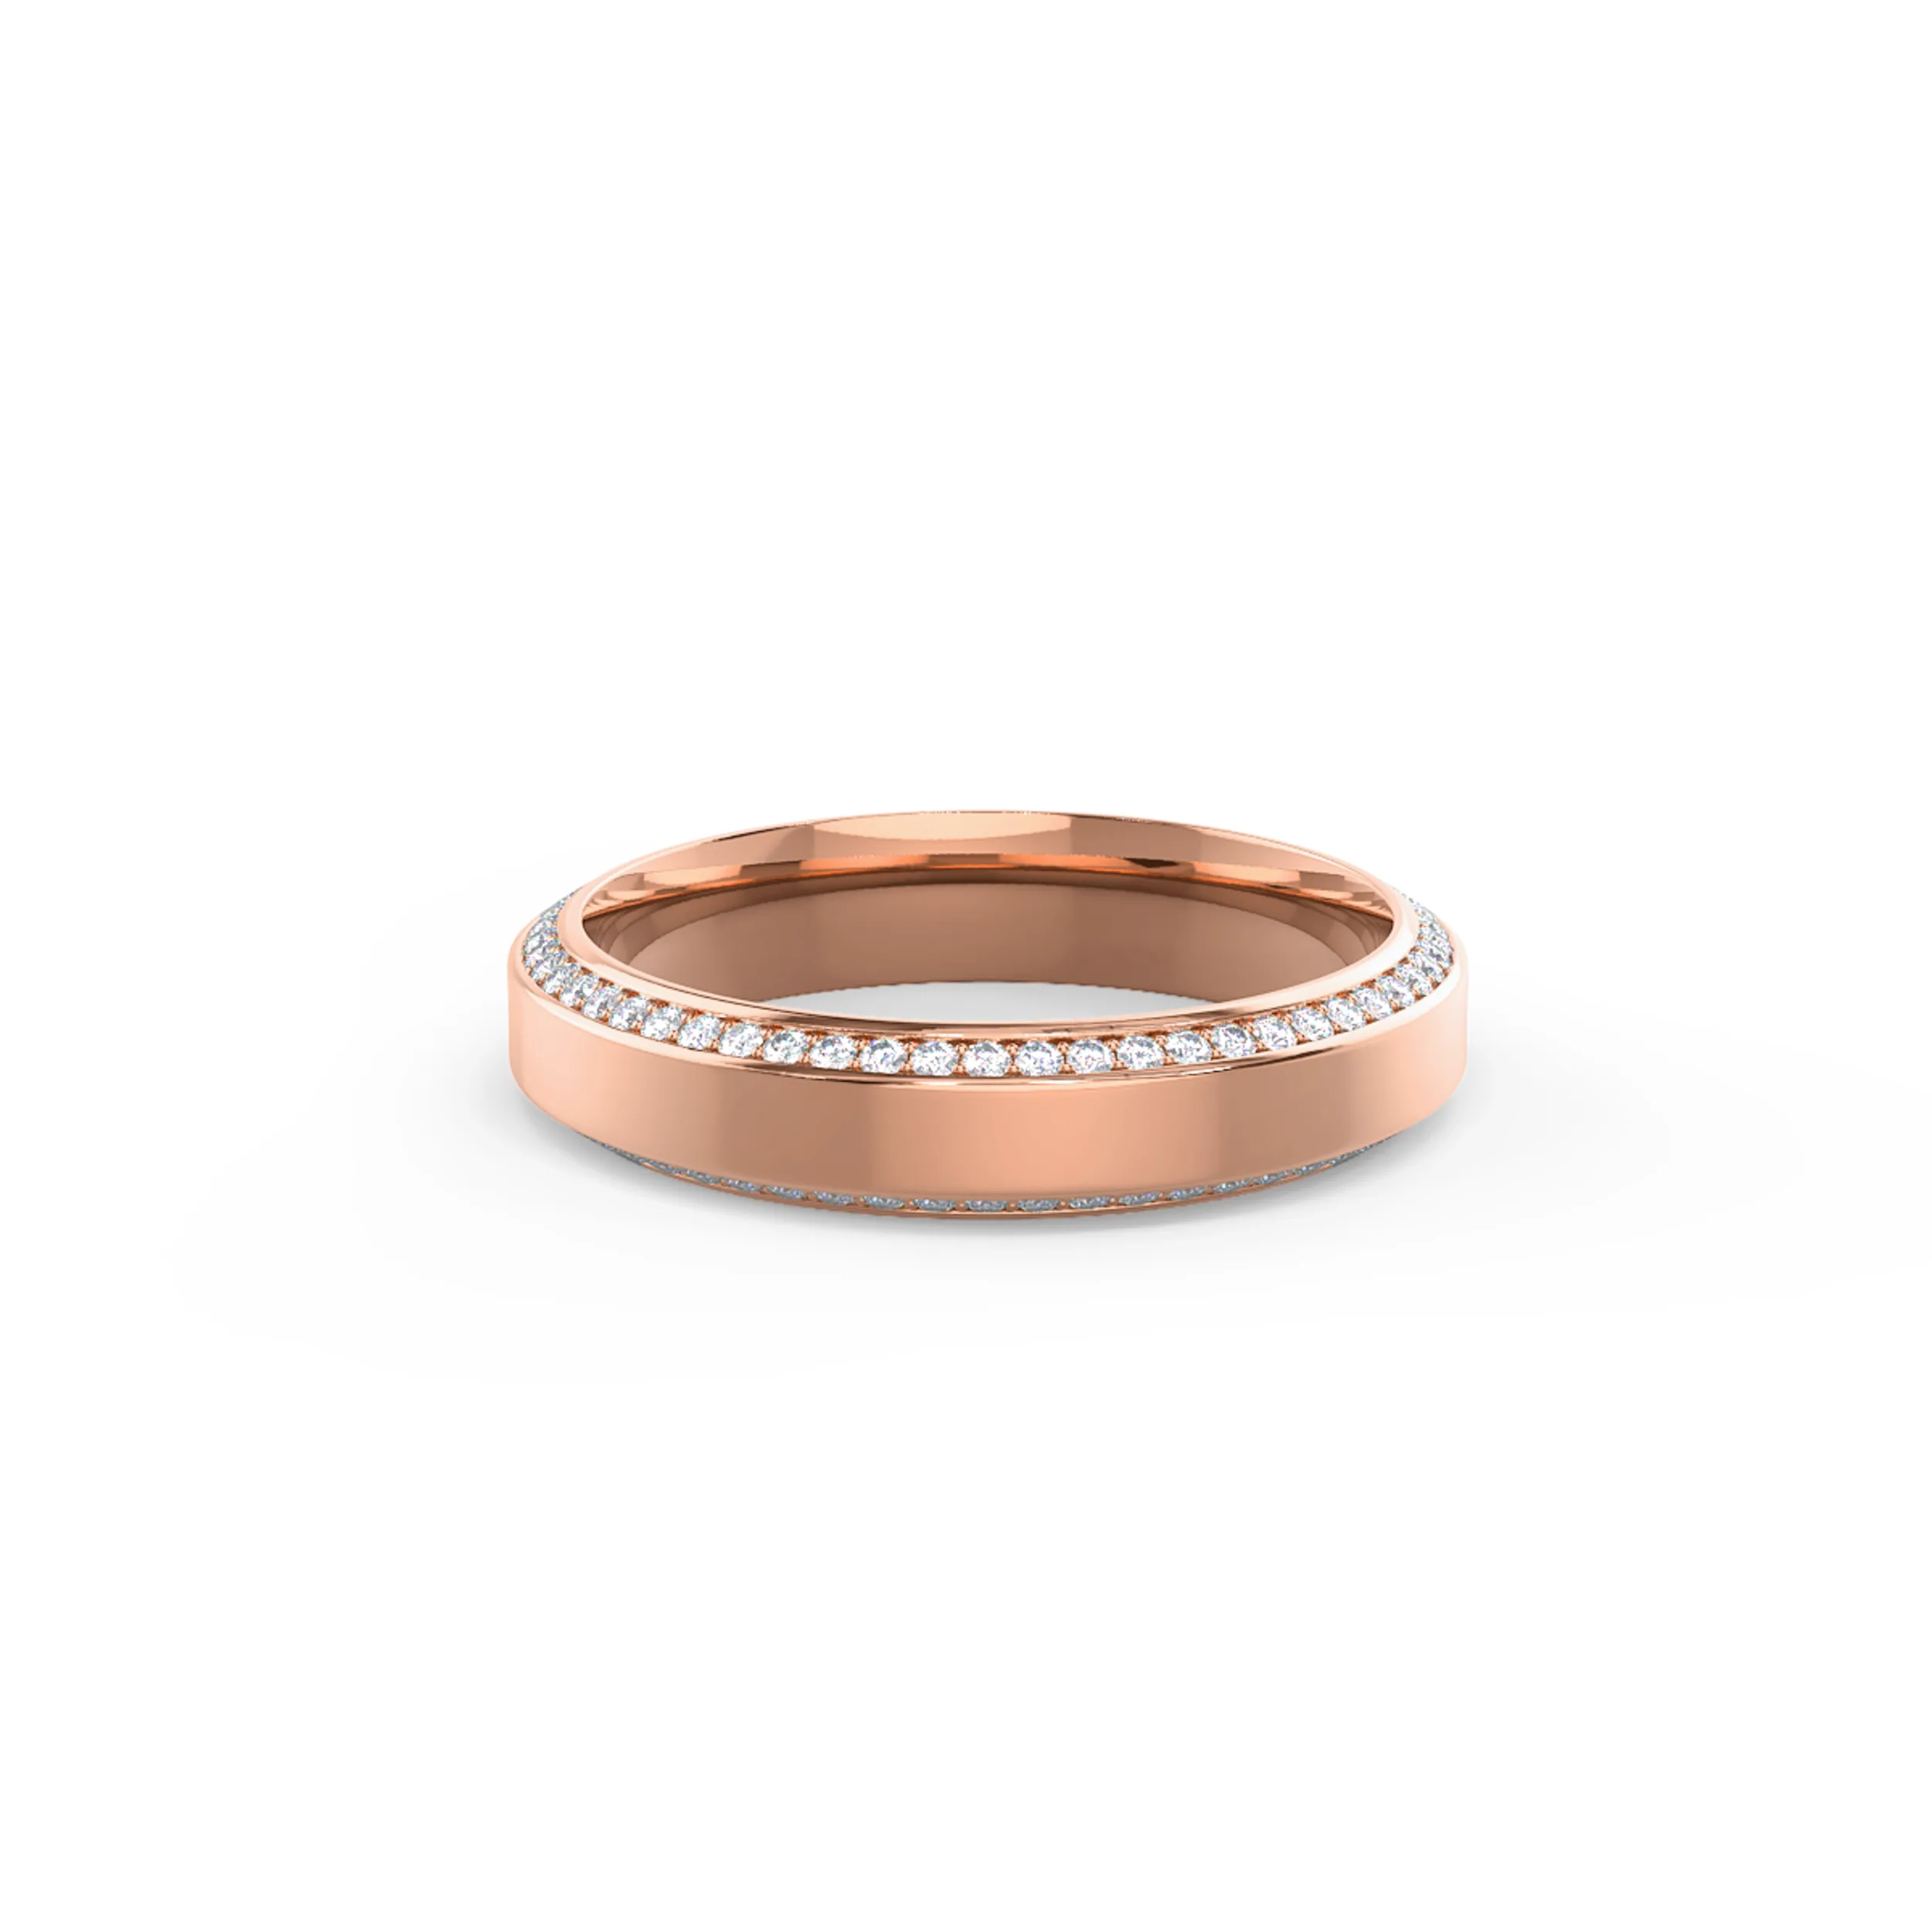 0.4 Carat Round Lab Diamonds set in 14kt Rose Gold Narrow Beveled Channel Eternity Band (Main View)